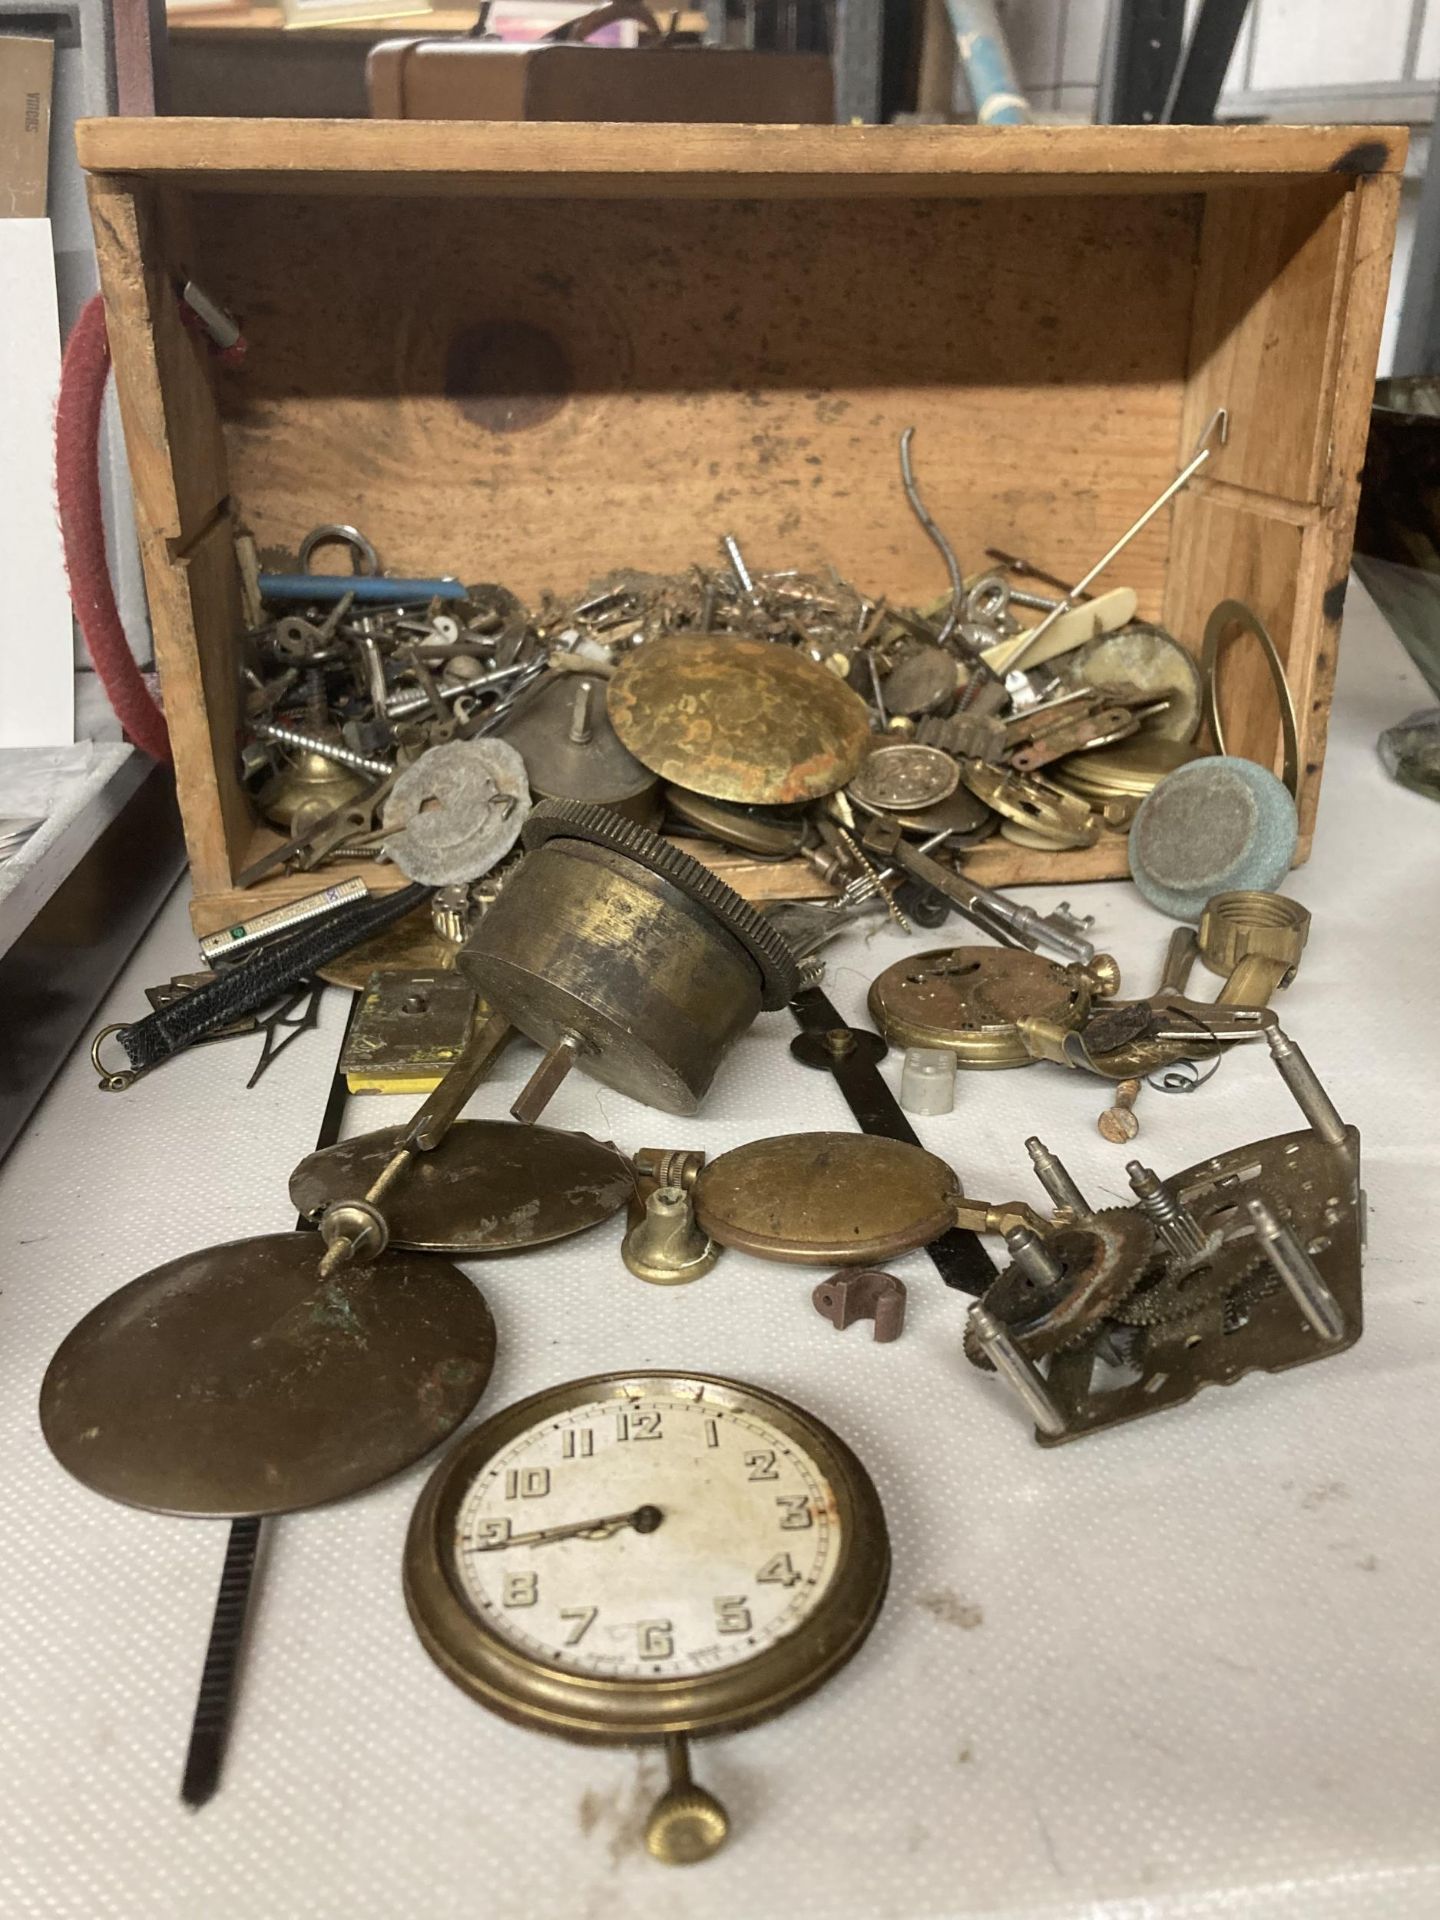 A QUANTITY OF CLOCK AND WATCH SPARE PARTS TO INCLUDE PENDULUMS, KEYS, WATCH FACES, ETC